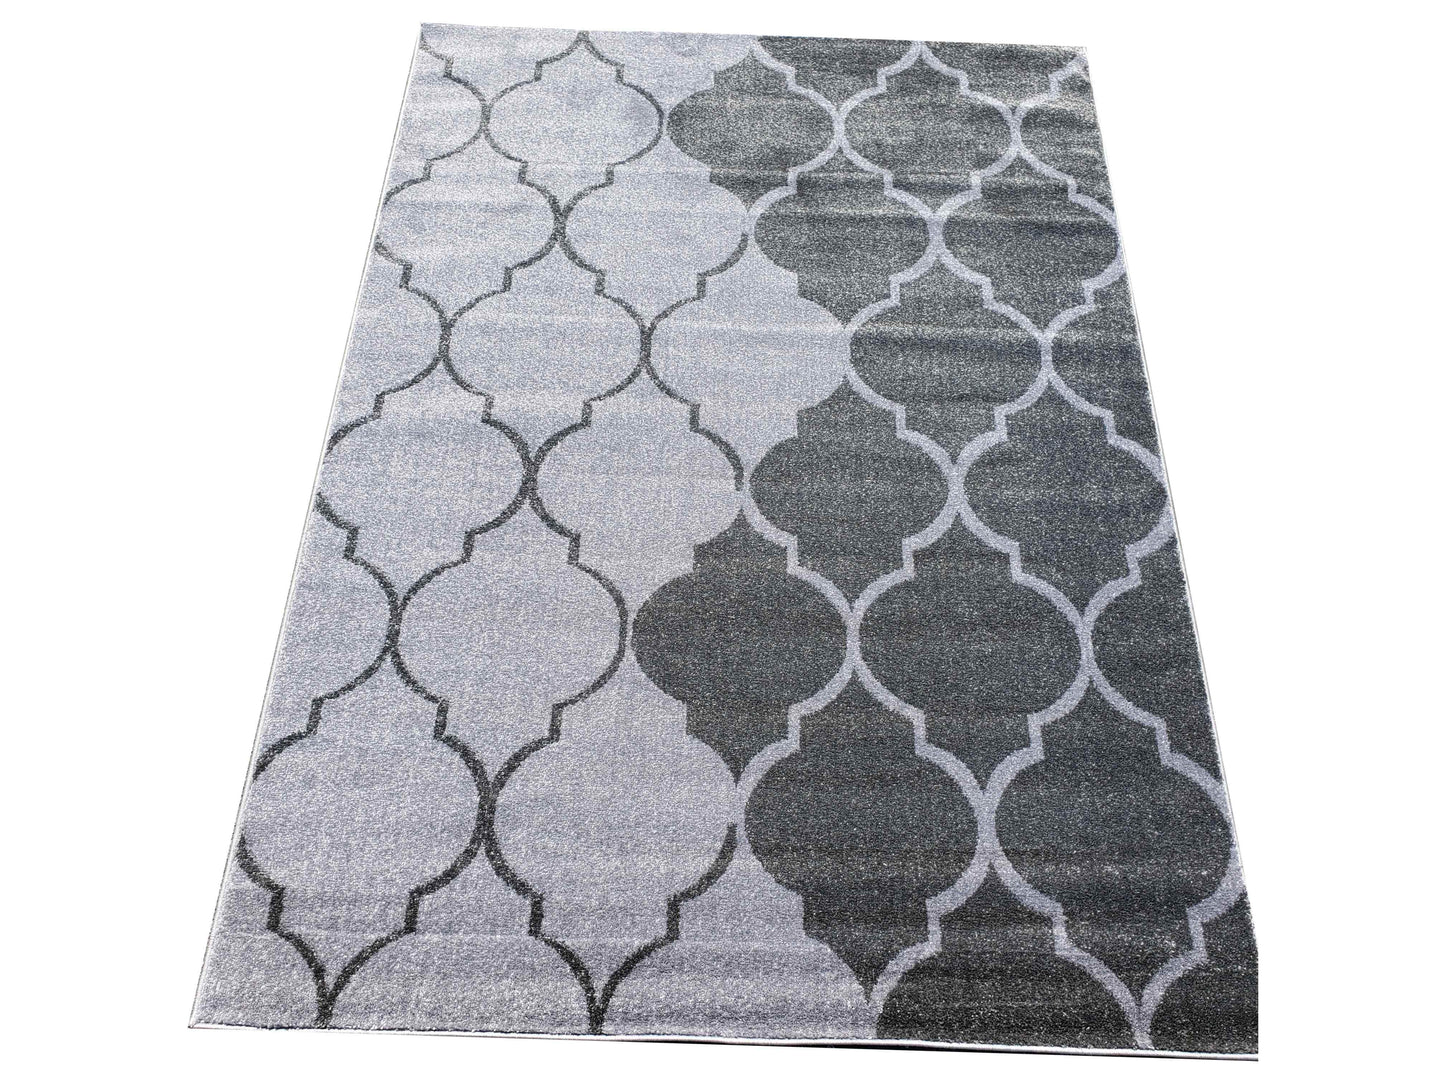 vintage area rug grey 5x7, 5x8 ft Contemporary, Living Room Carpet, Bedroom, Home Office